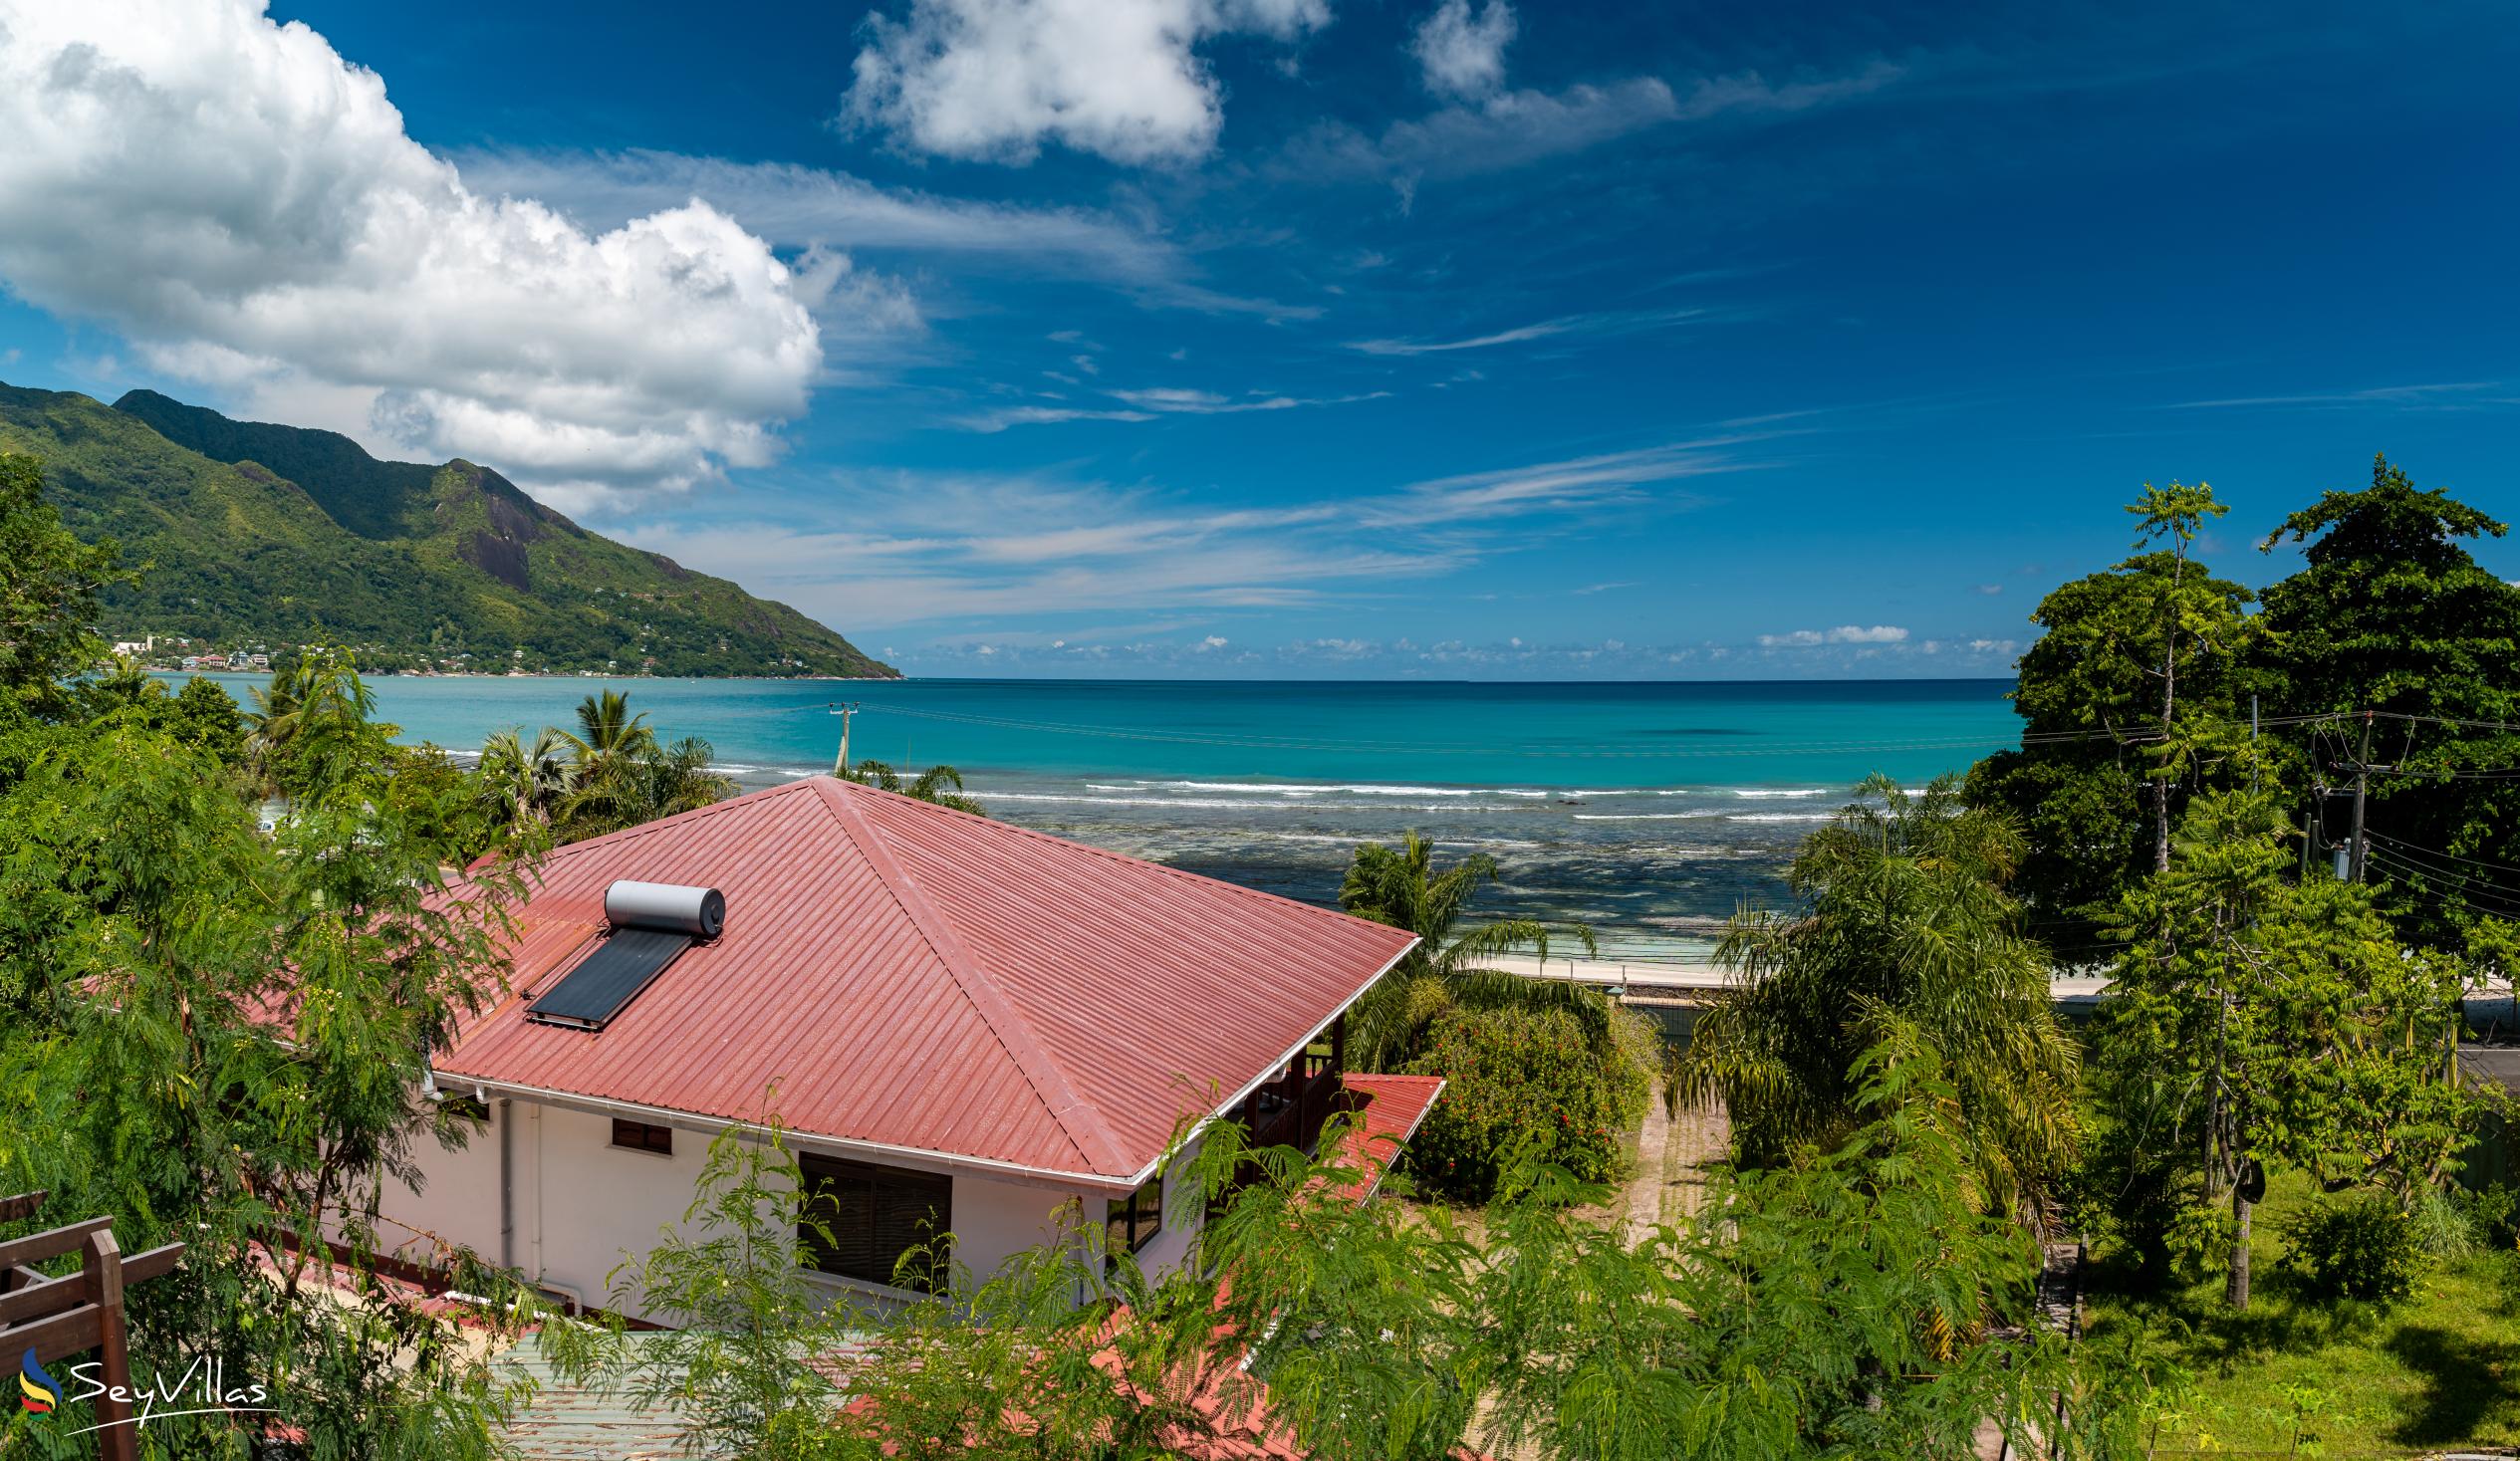 Photo 3: Crystal Shores Self Catering Apartments - Outdoor area - Mahé (Seychelles)